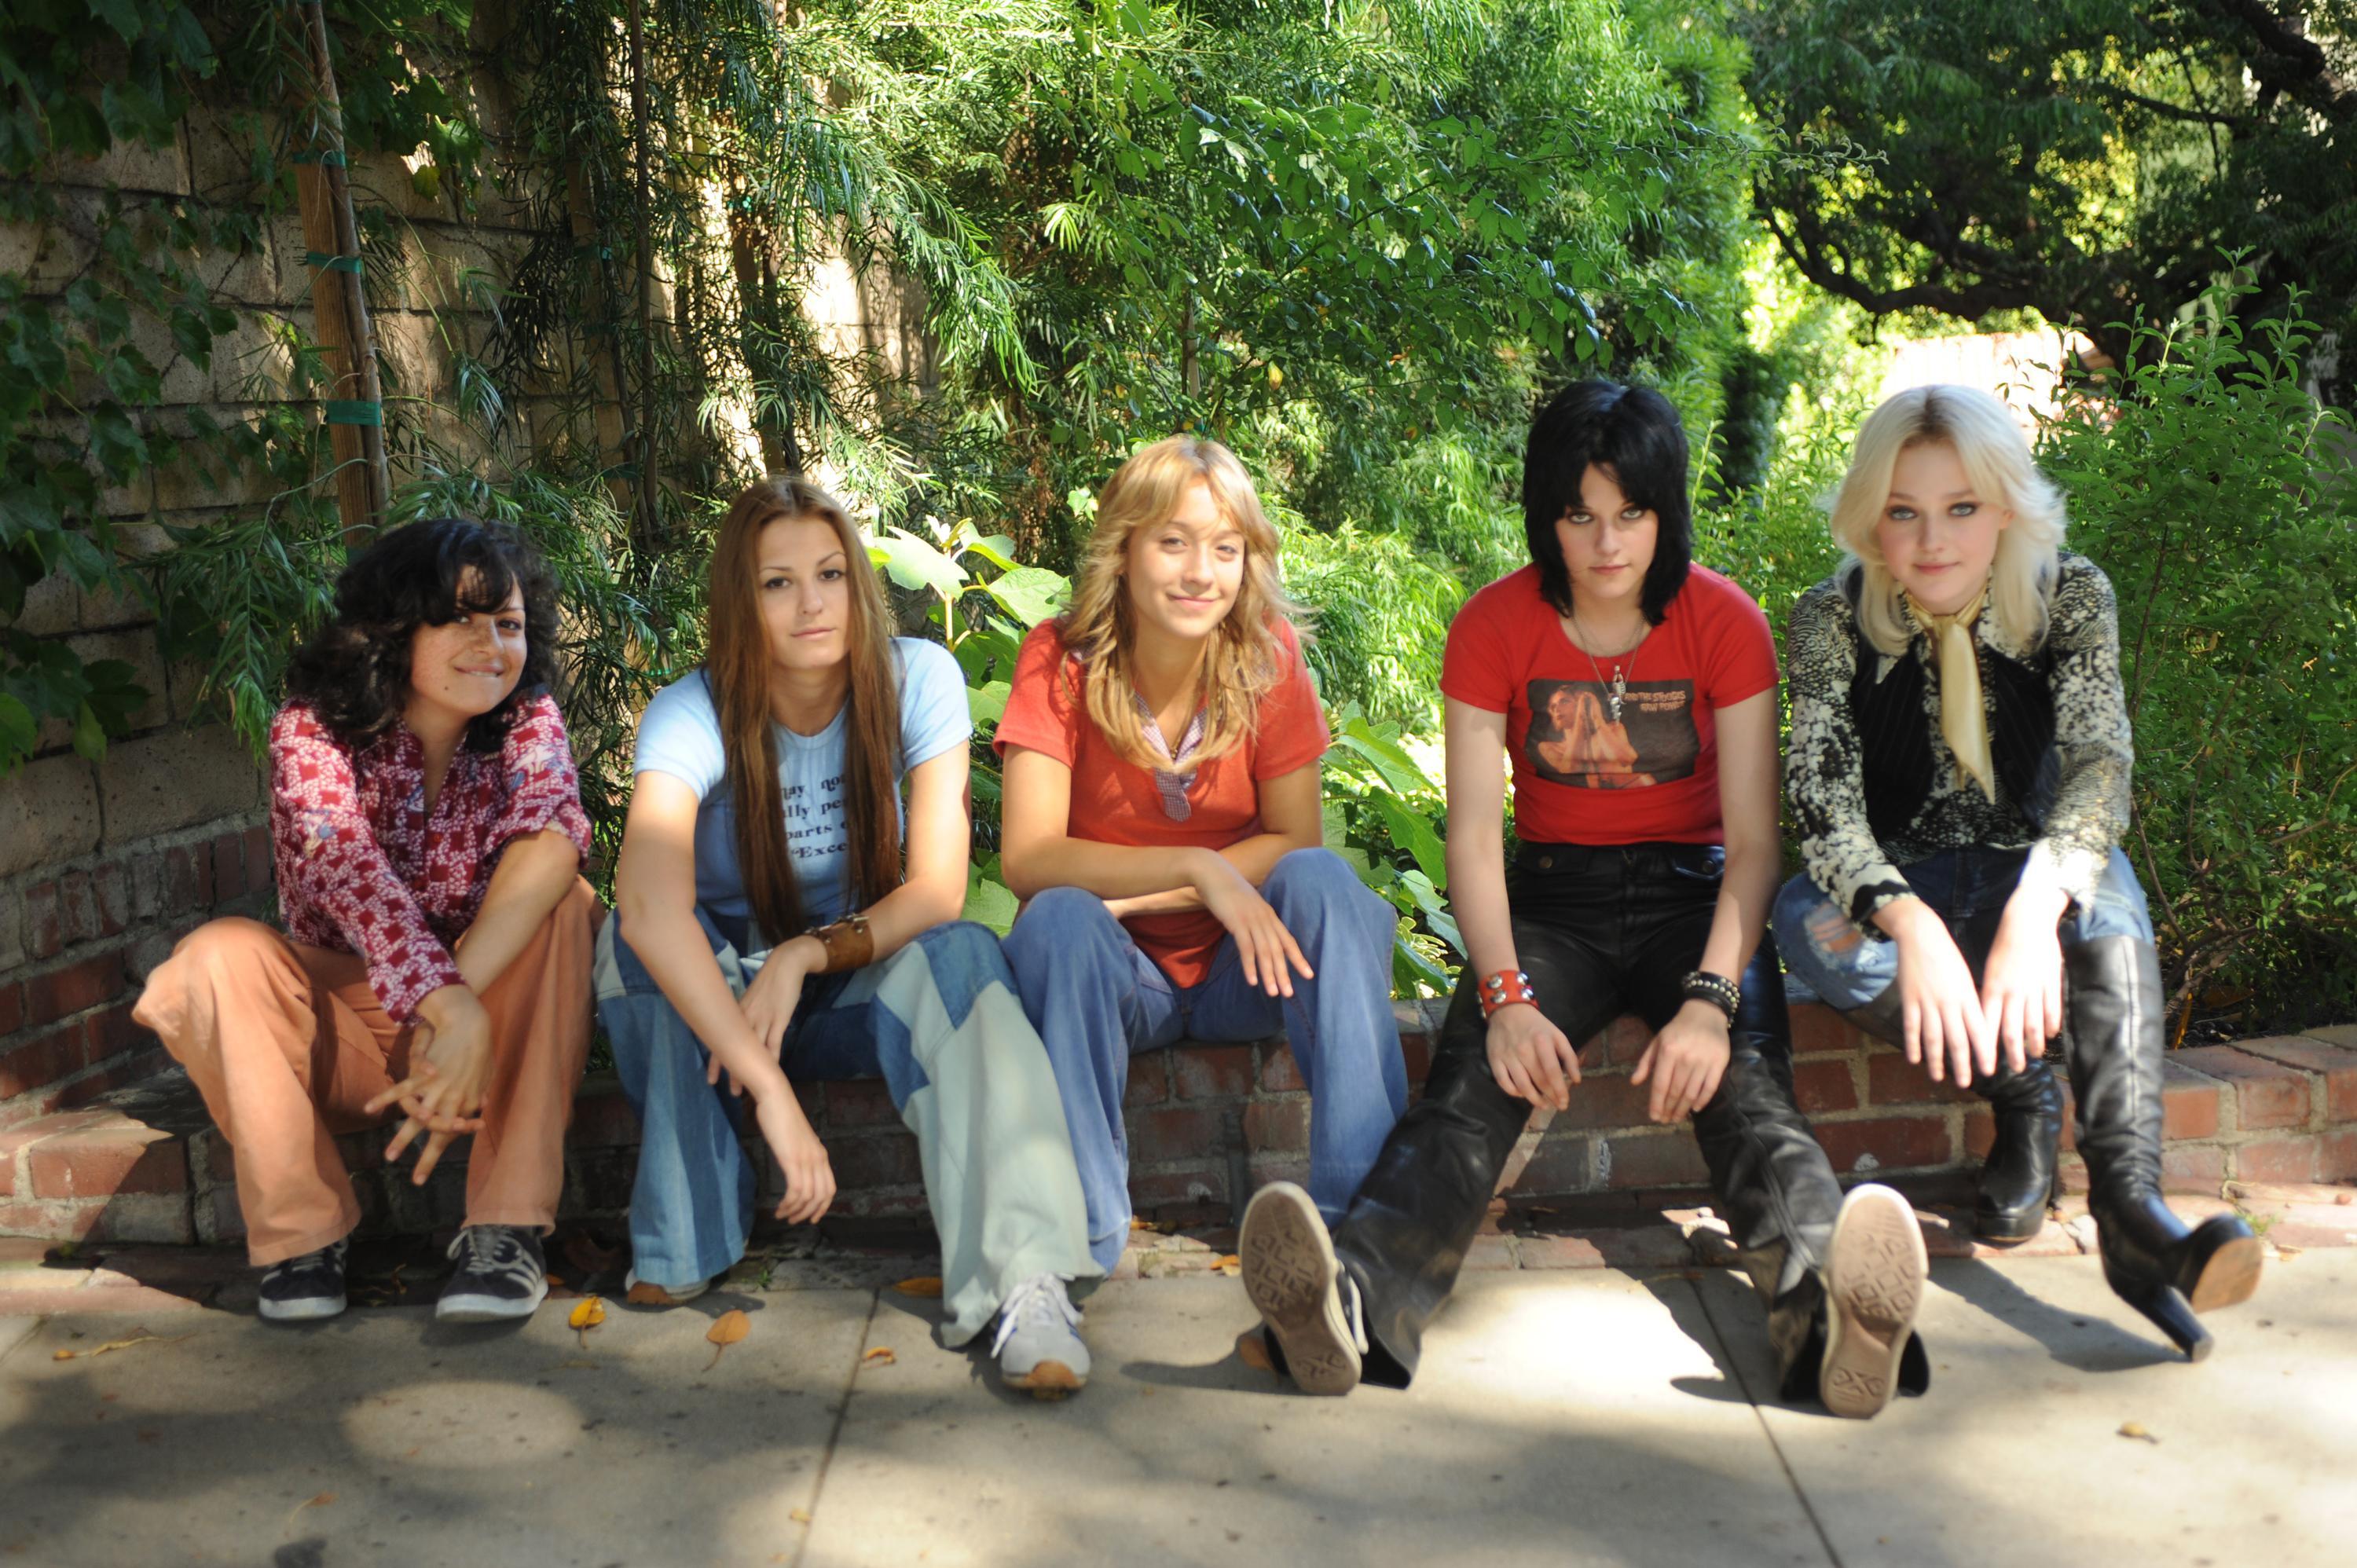 New High Resolution Image from THE RUNAWAYS Starring